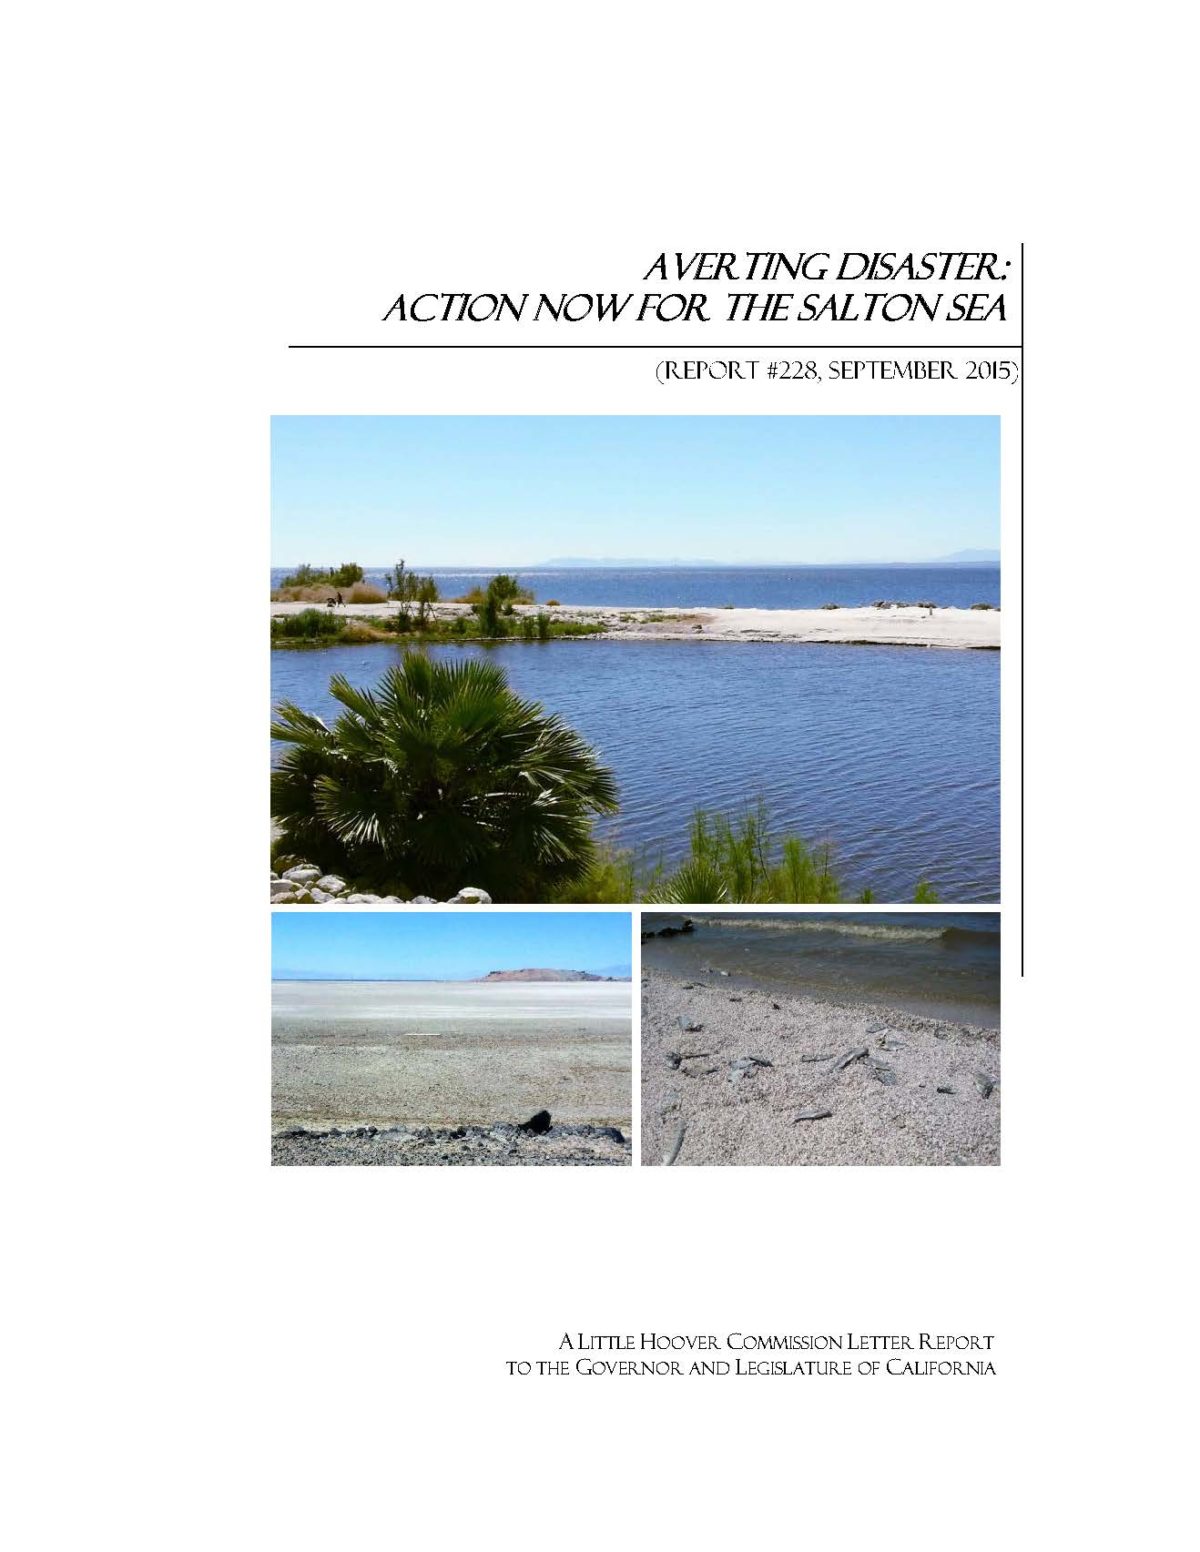 Averting disaster: Action now for the Salton Sea